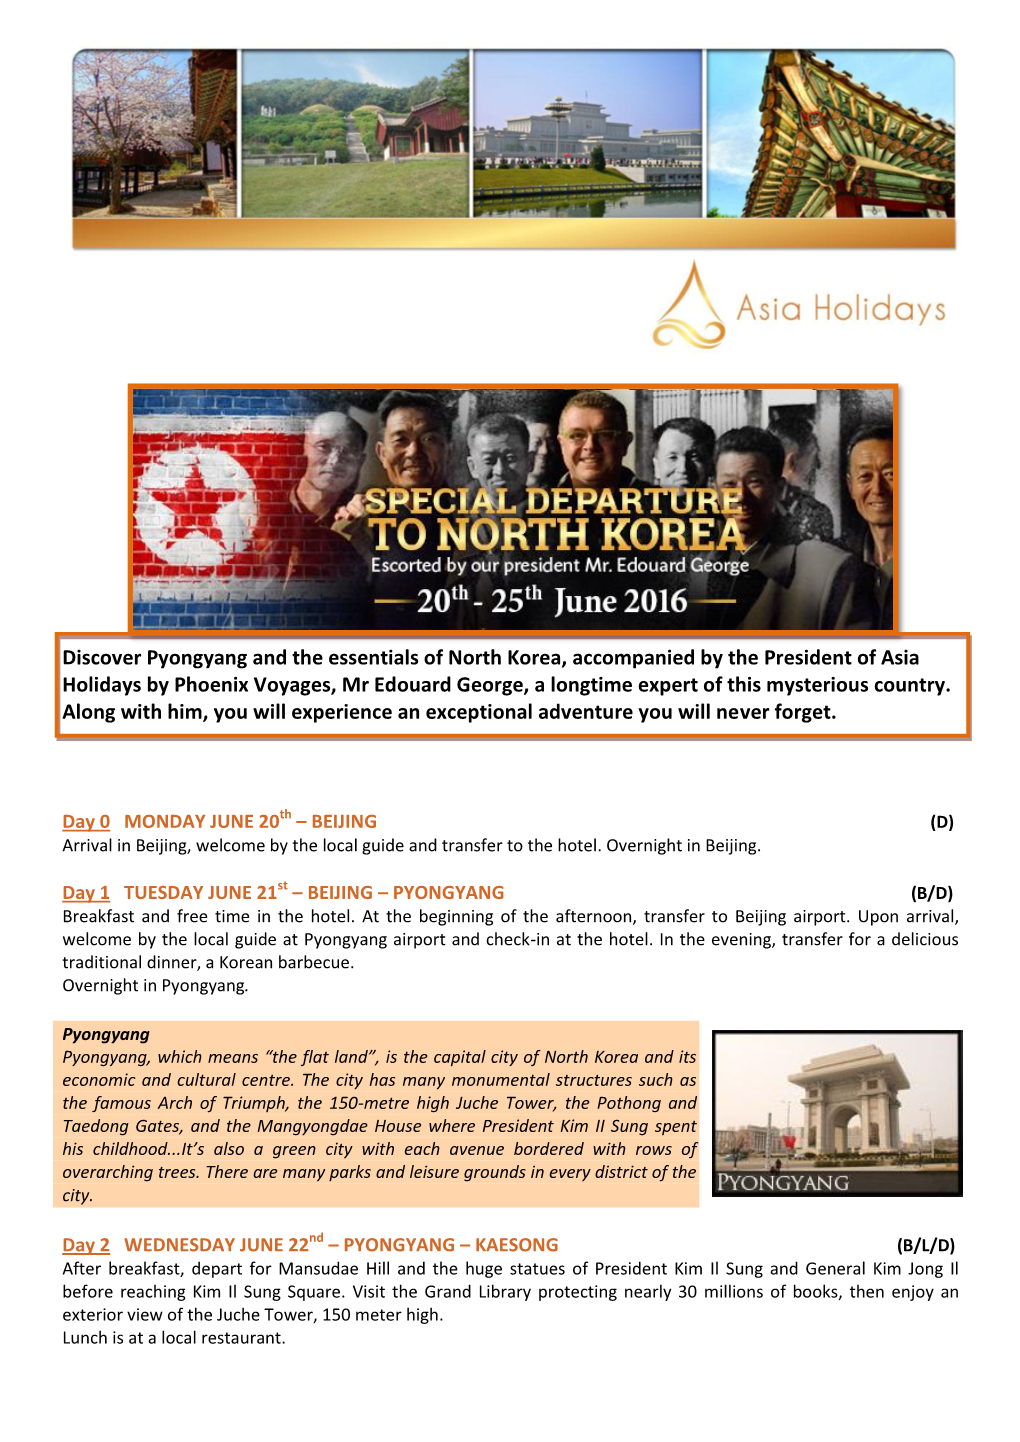 Discover Pyongyang and the Essentials of North Korea